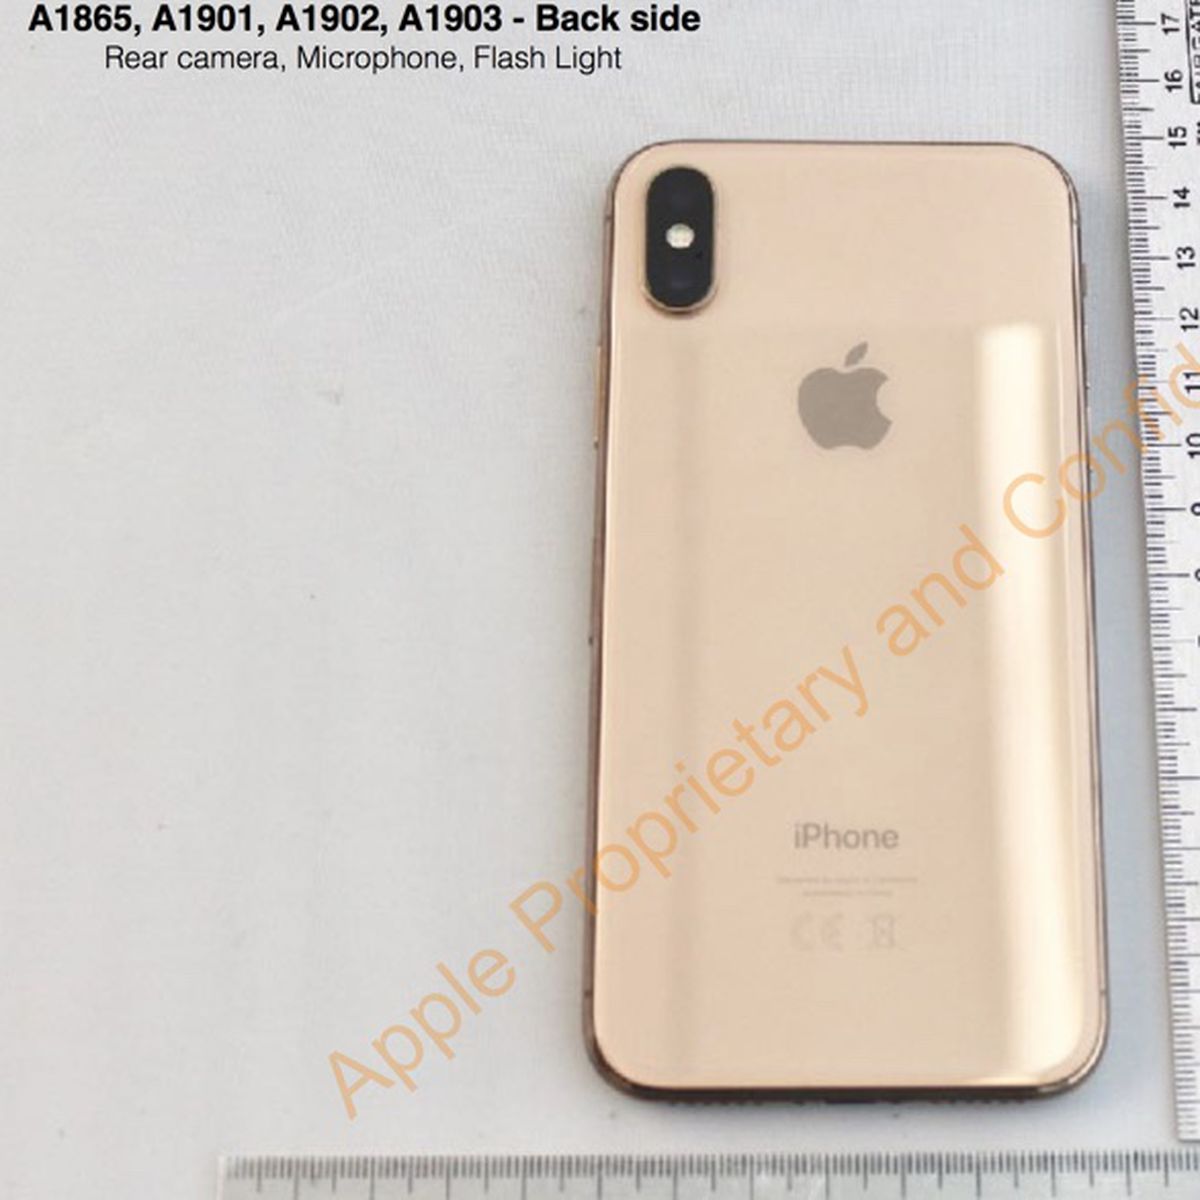 Fcc Filing Confirms Apple Planned On Launching Gold Iphone X Macrumors